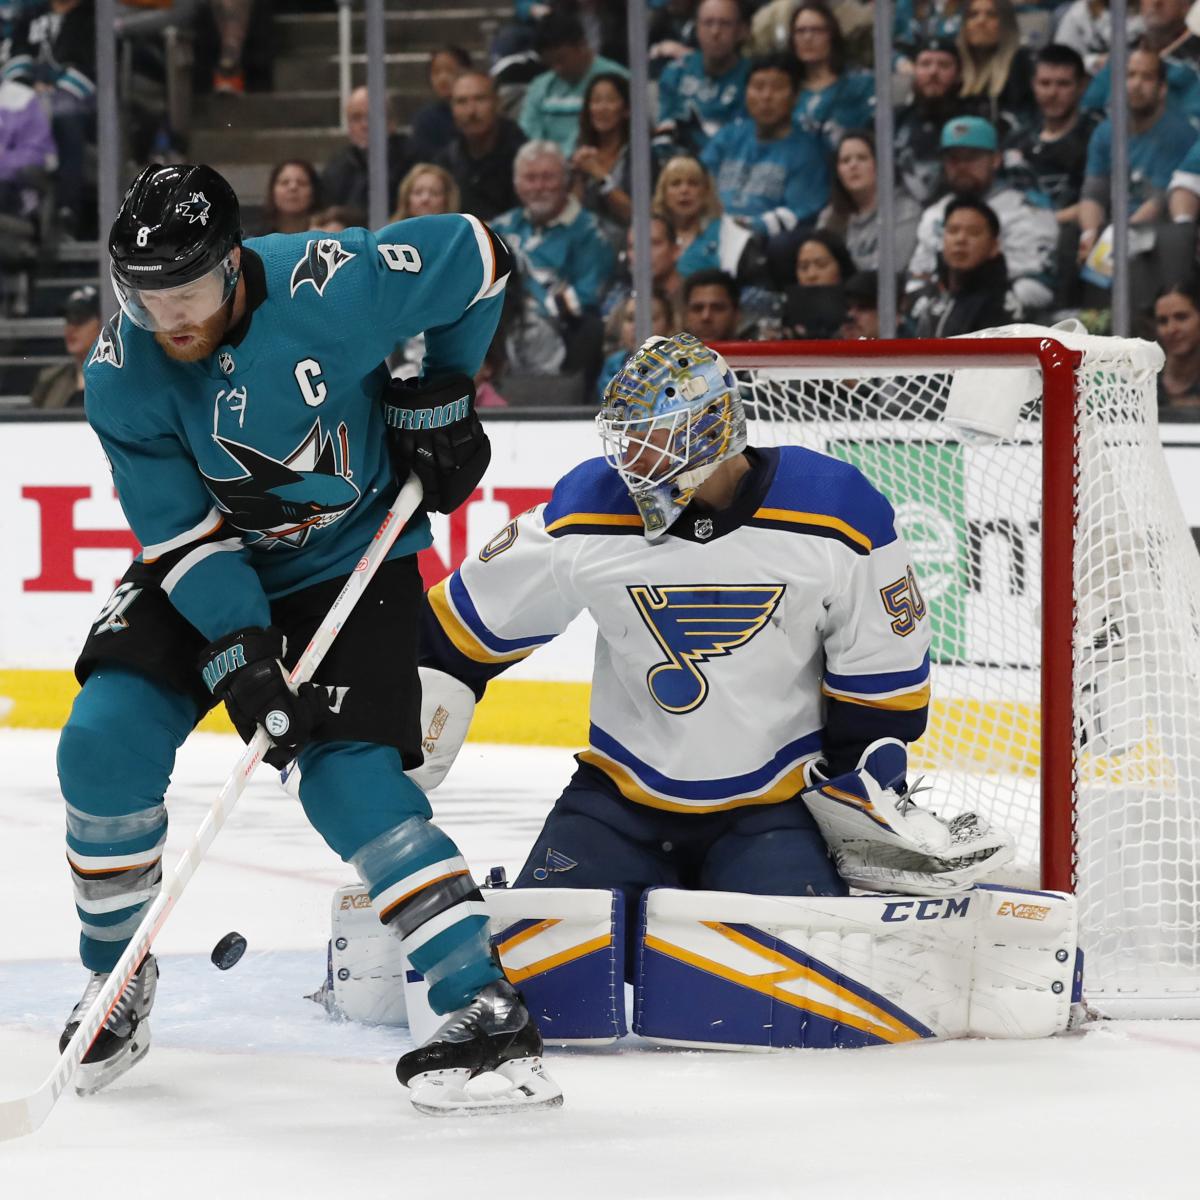 NHL Playoffs 2019: Remaining Conference Finals Dates, TV Schedule and